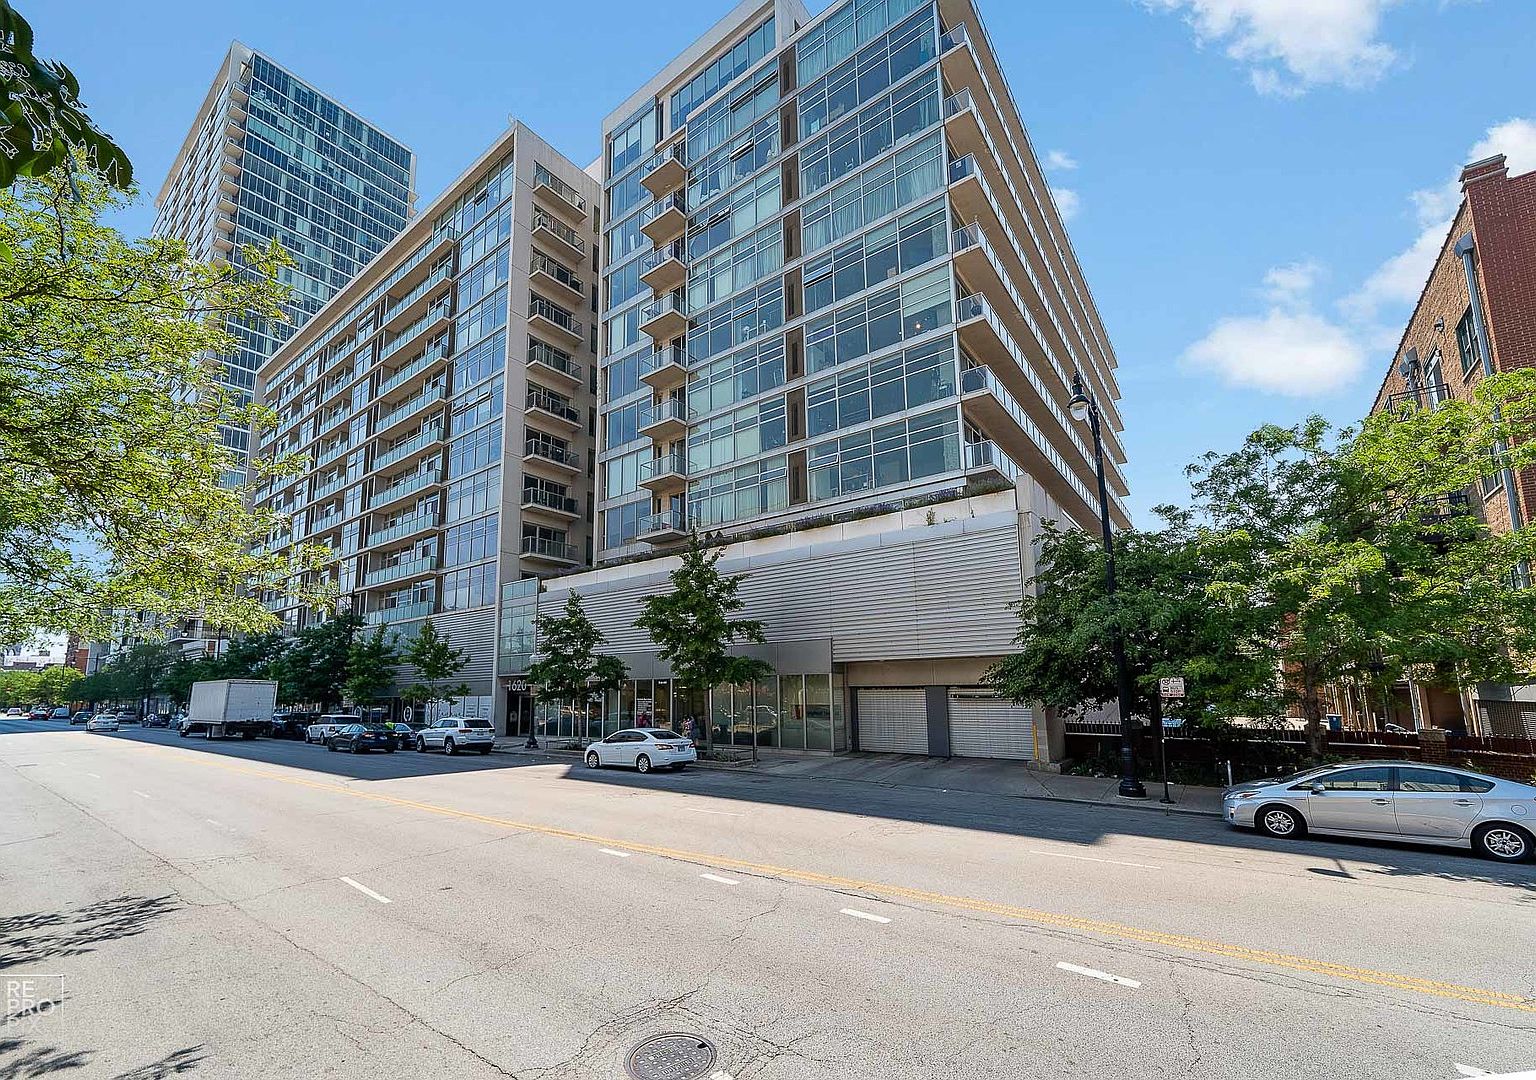 1620 S Michigan Ave Chicago, IL, 60616 - Apartments for Rent